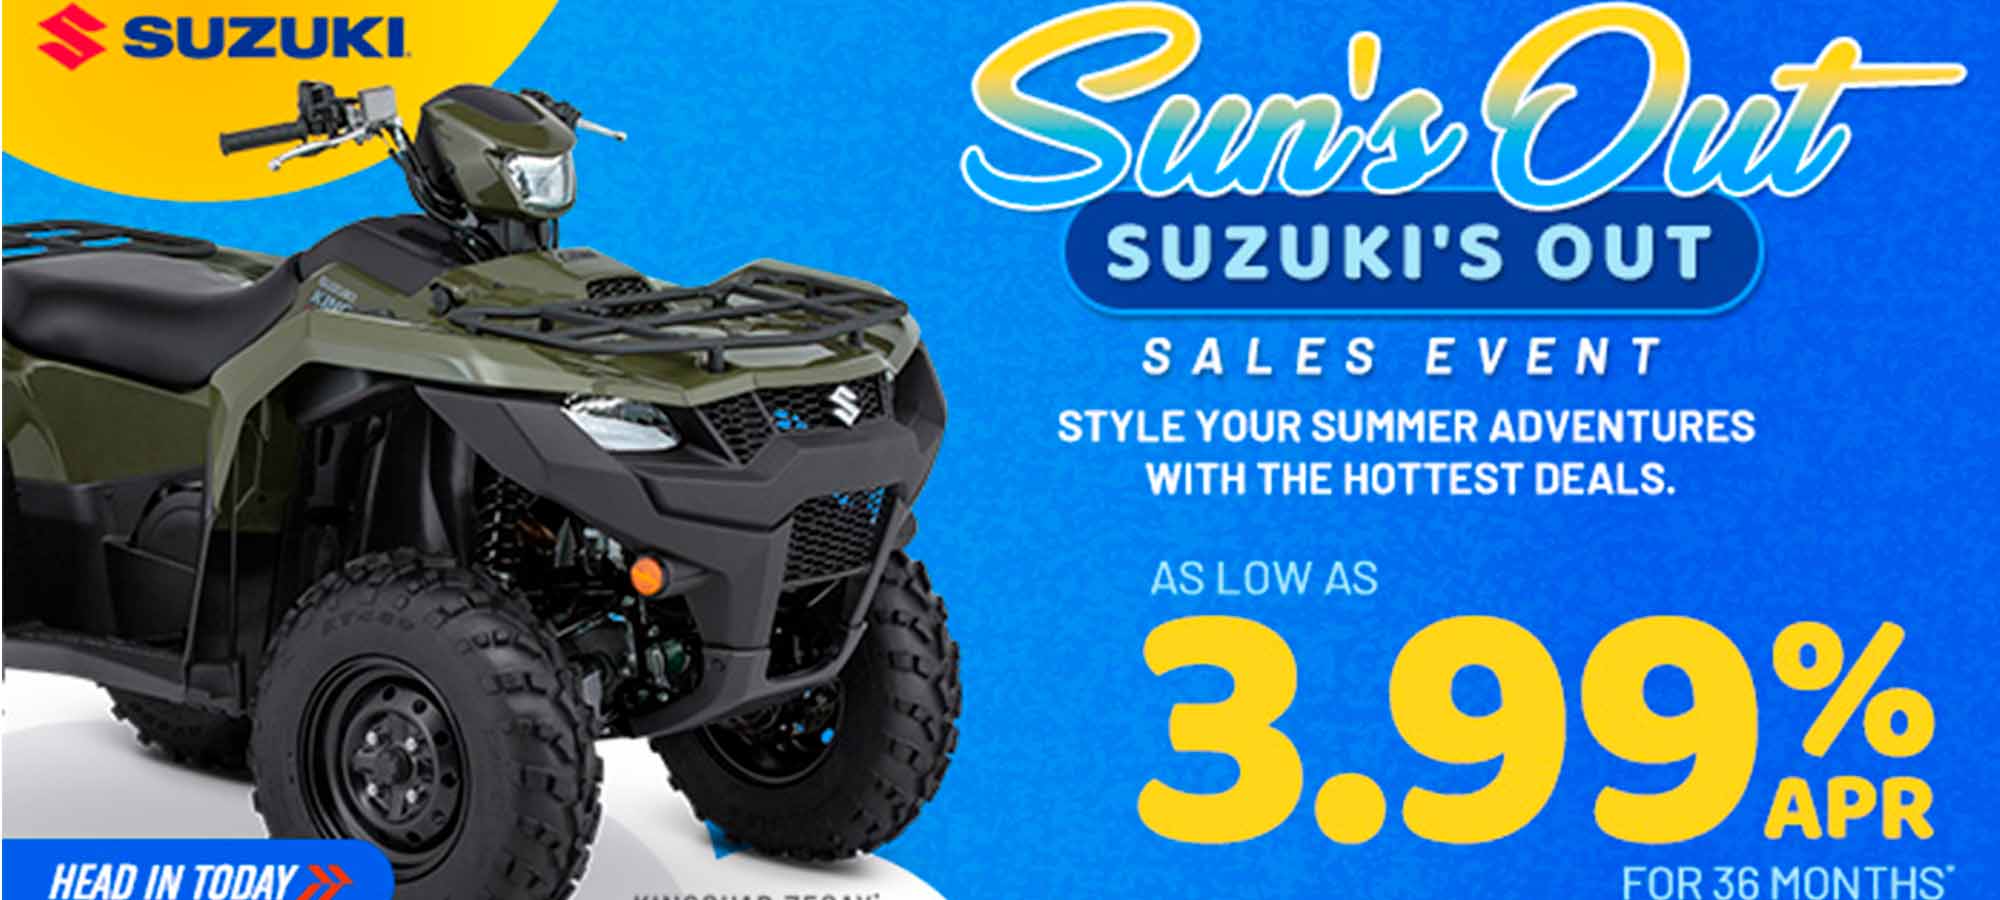 Suzuki US - Sun's Out Suzuki's Out Sales Event at Hebeler Sales & Service, Lockport, NY 14094